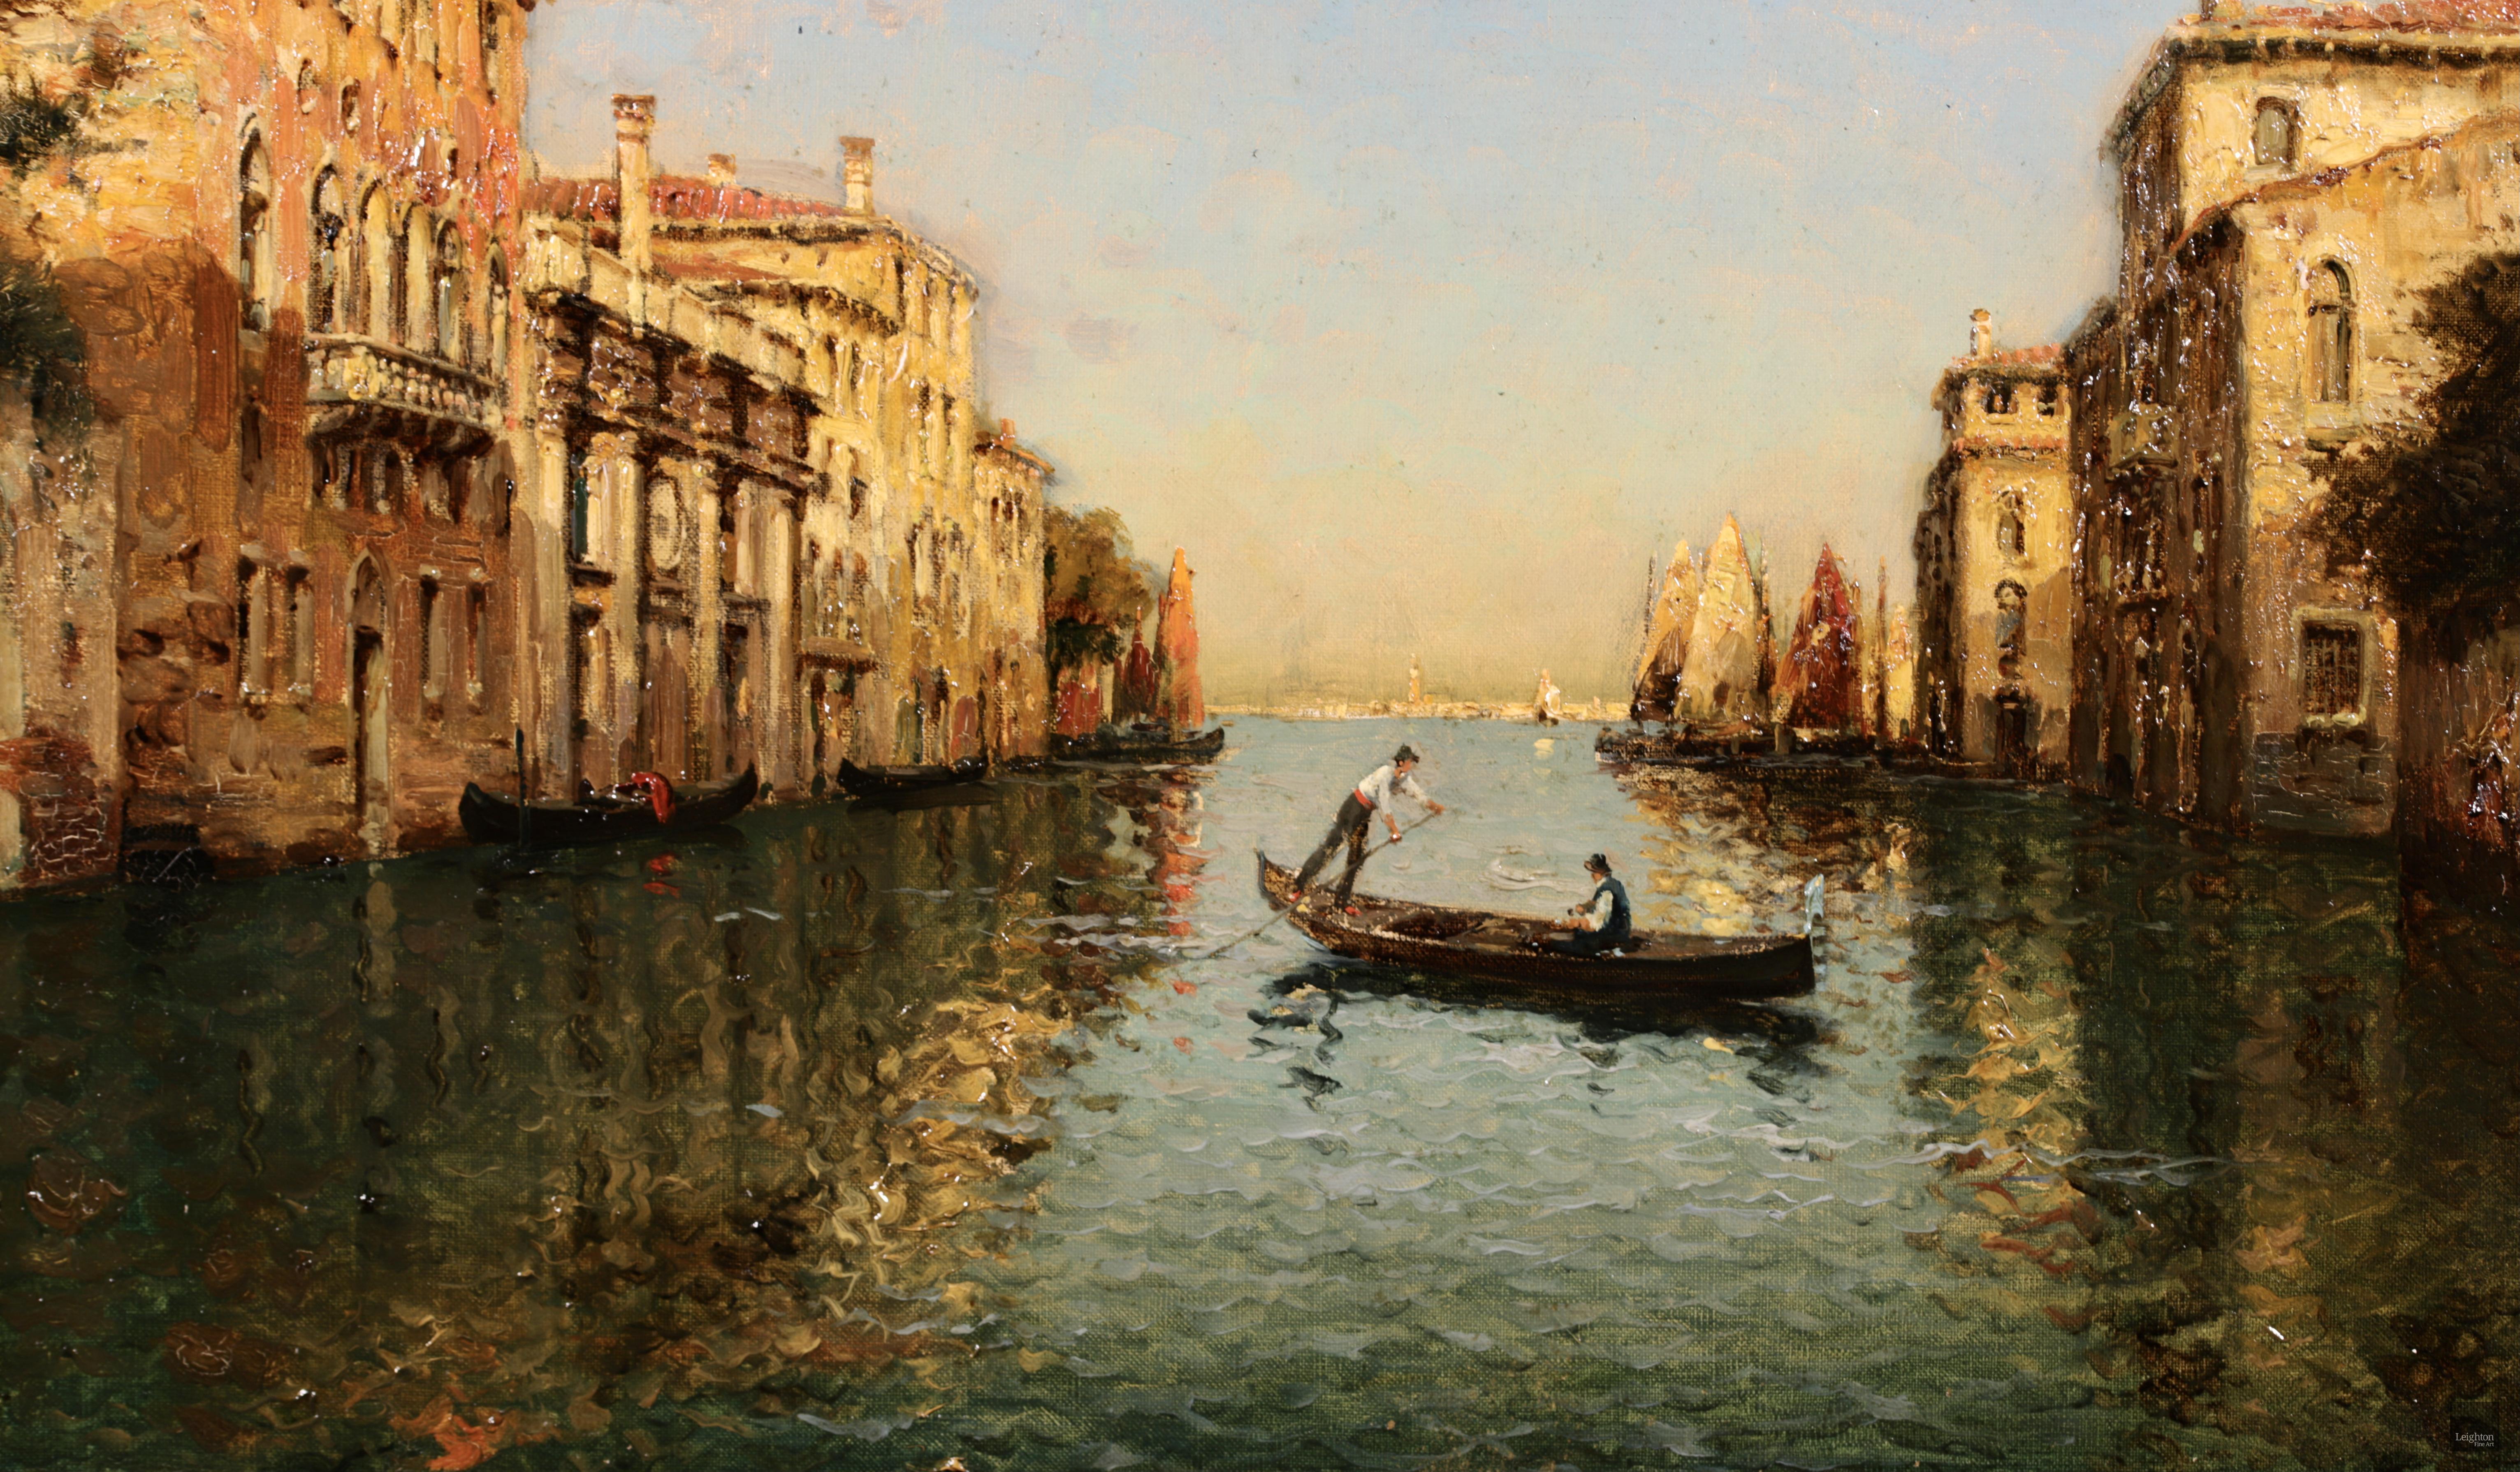 Gondoliers on a canal - Venice - Impressionist Oil, Landscape by Antoine Bouvard 1